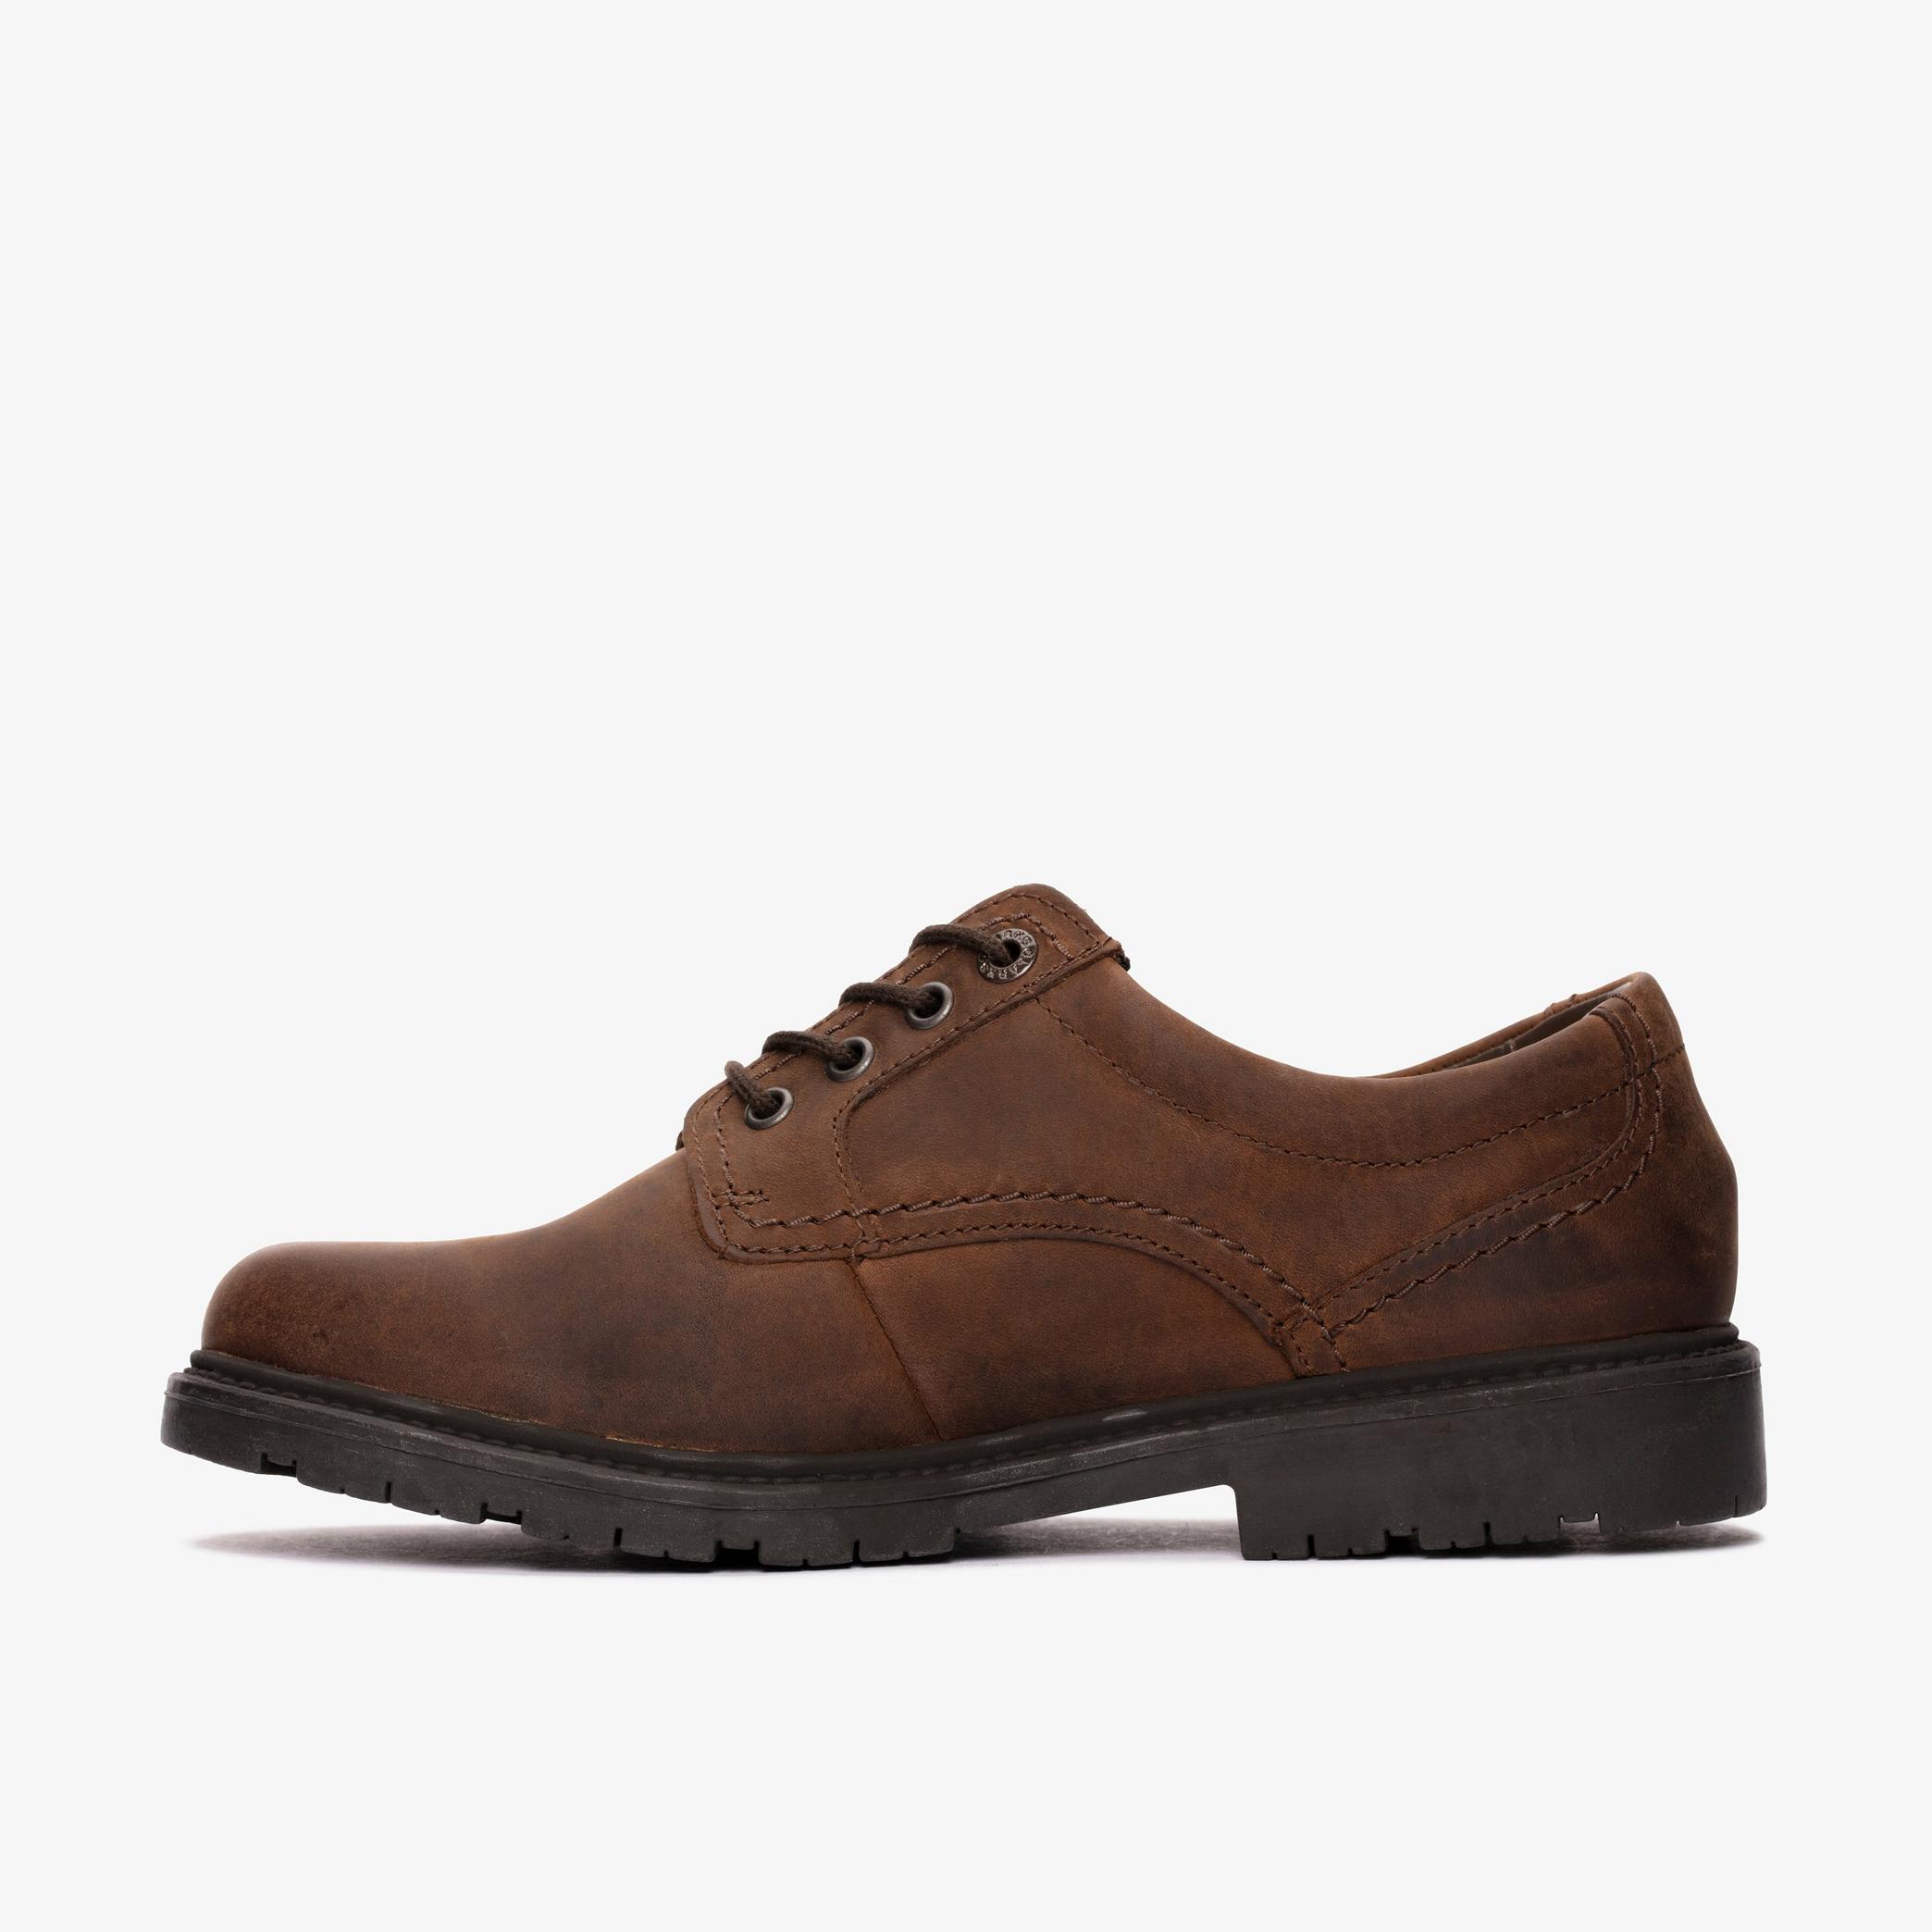 MENS Lane Stride Brown Leather Shoes | Clarks Outlet